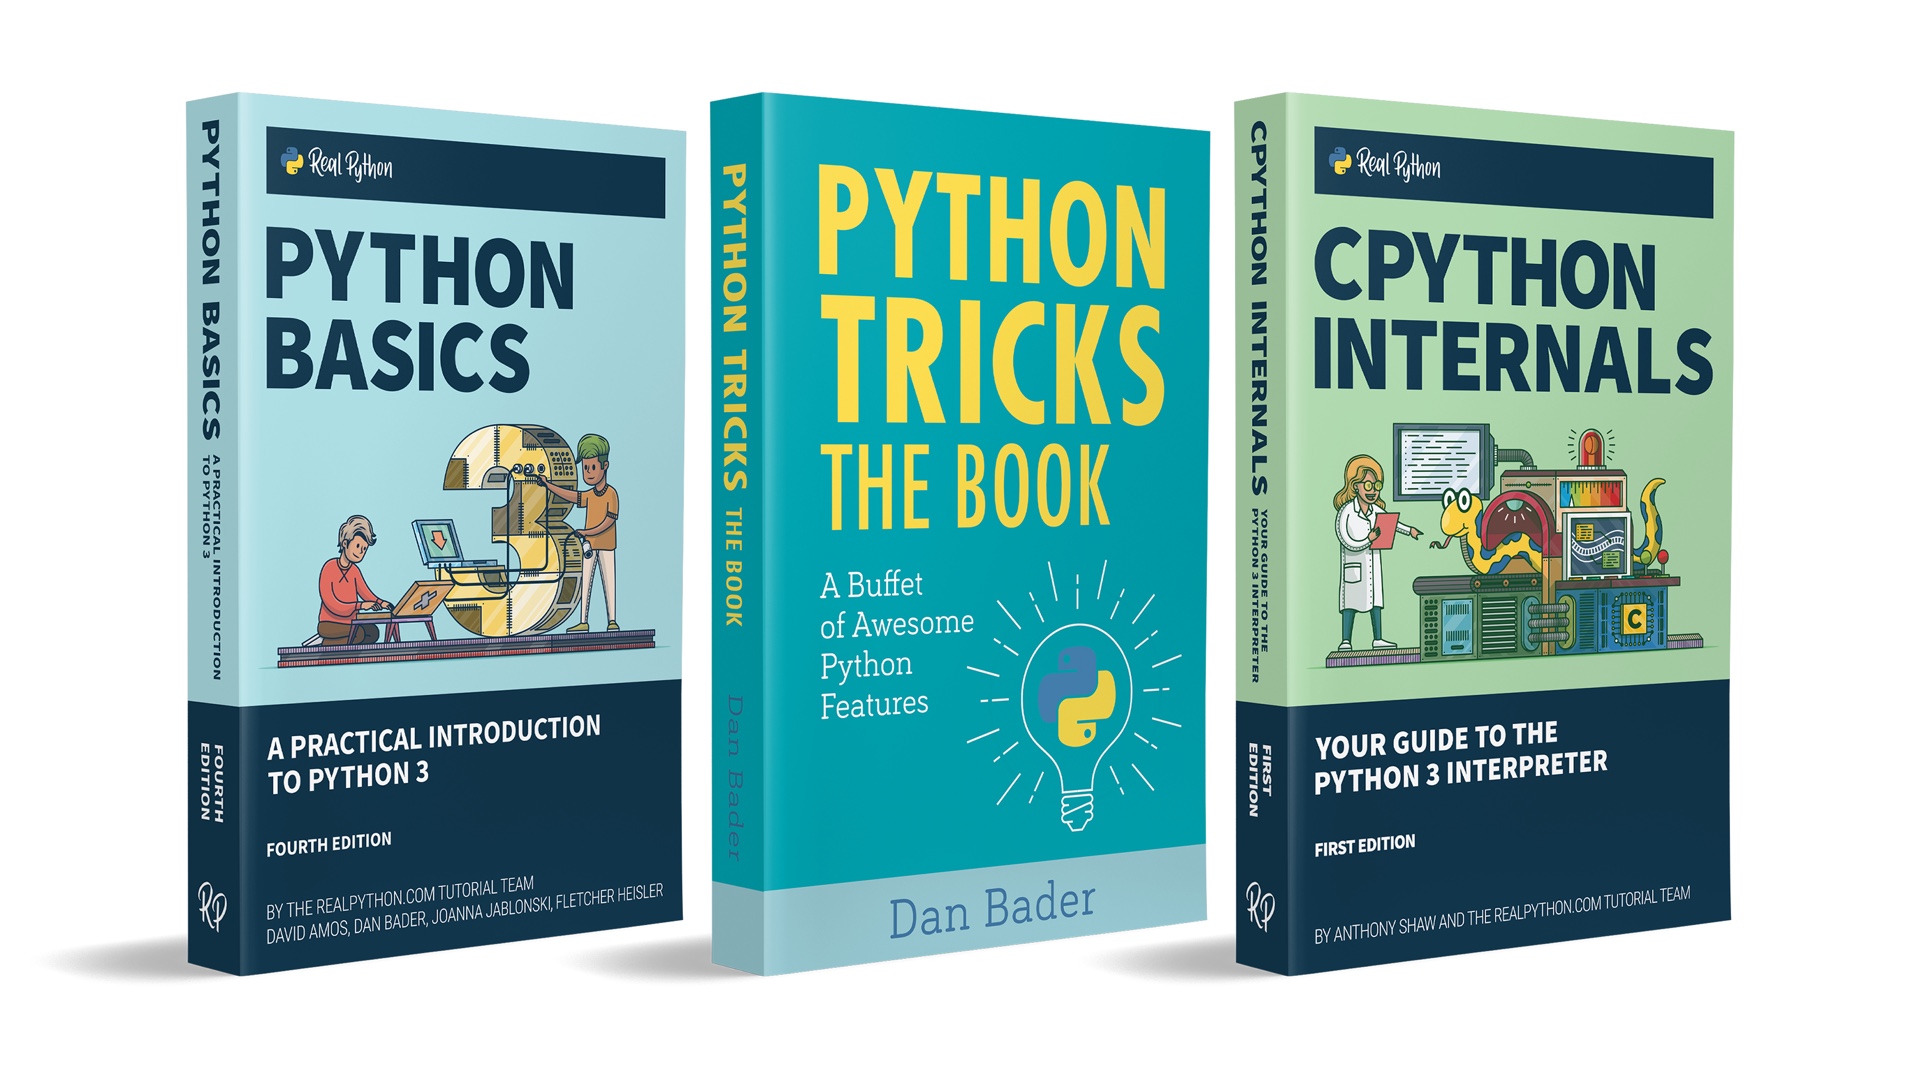 Python Books published by Real Python